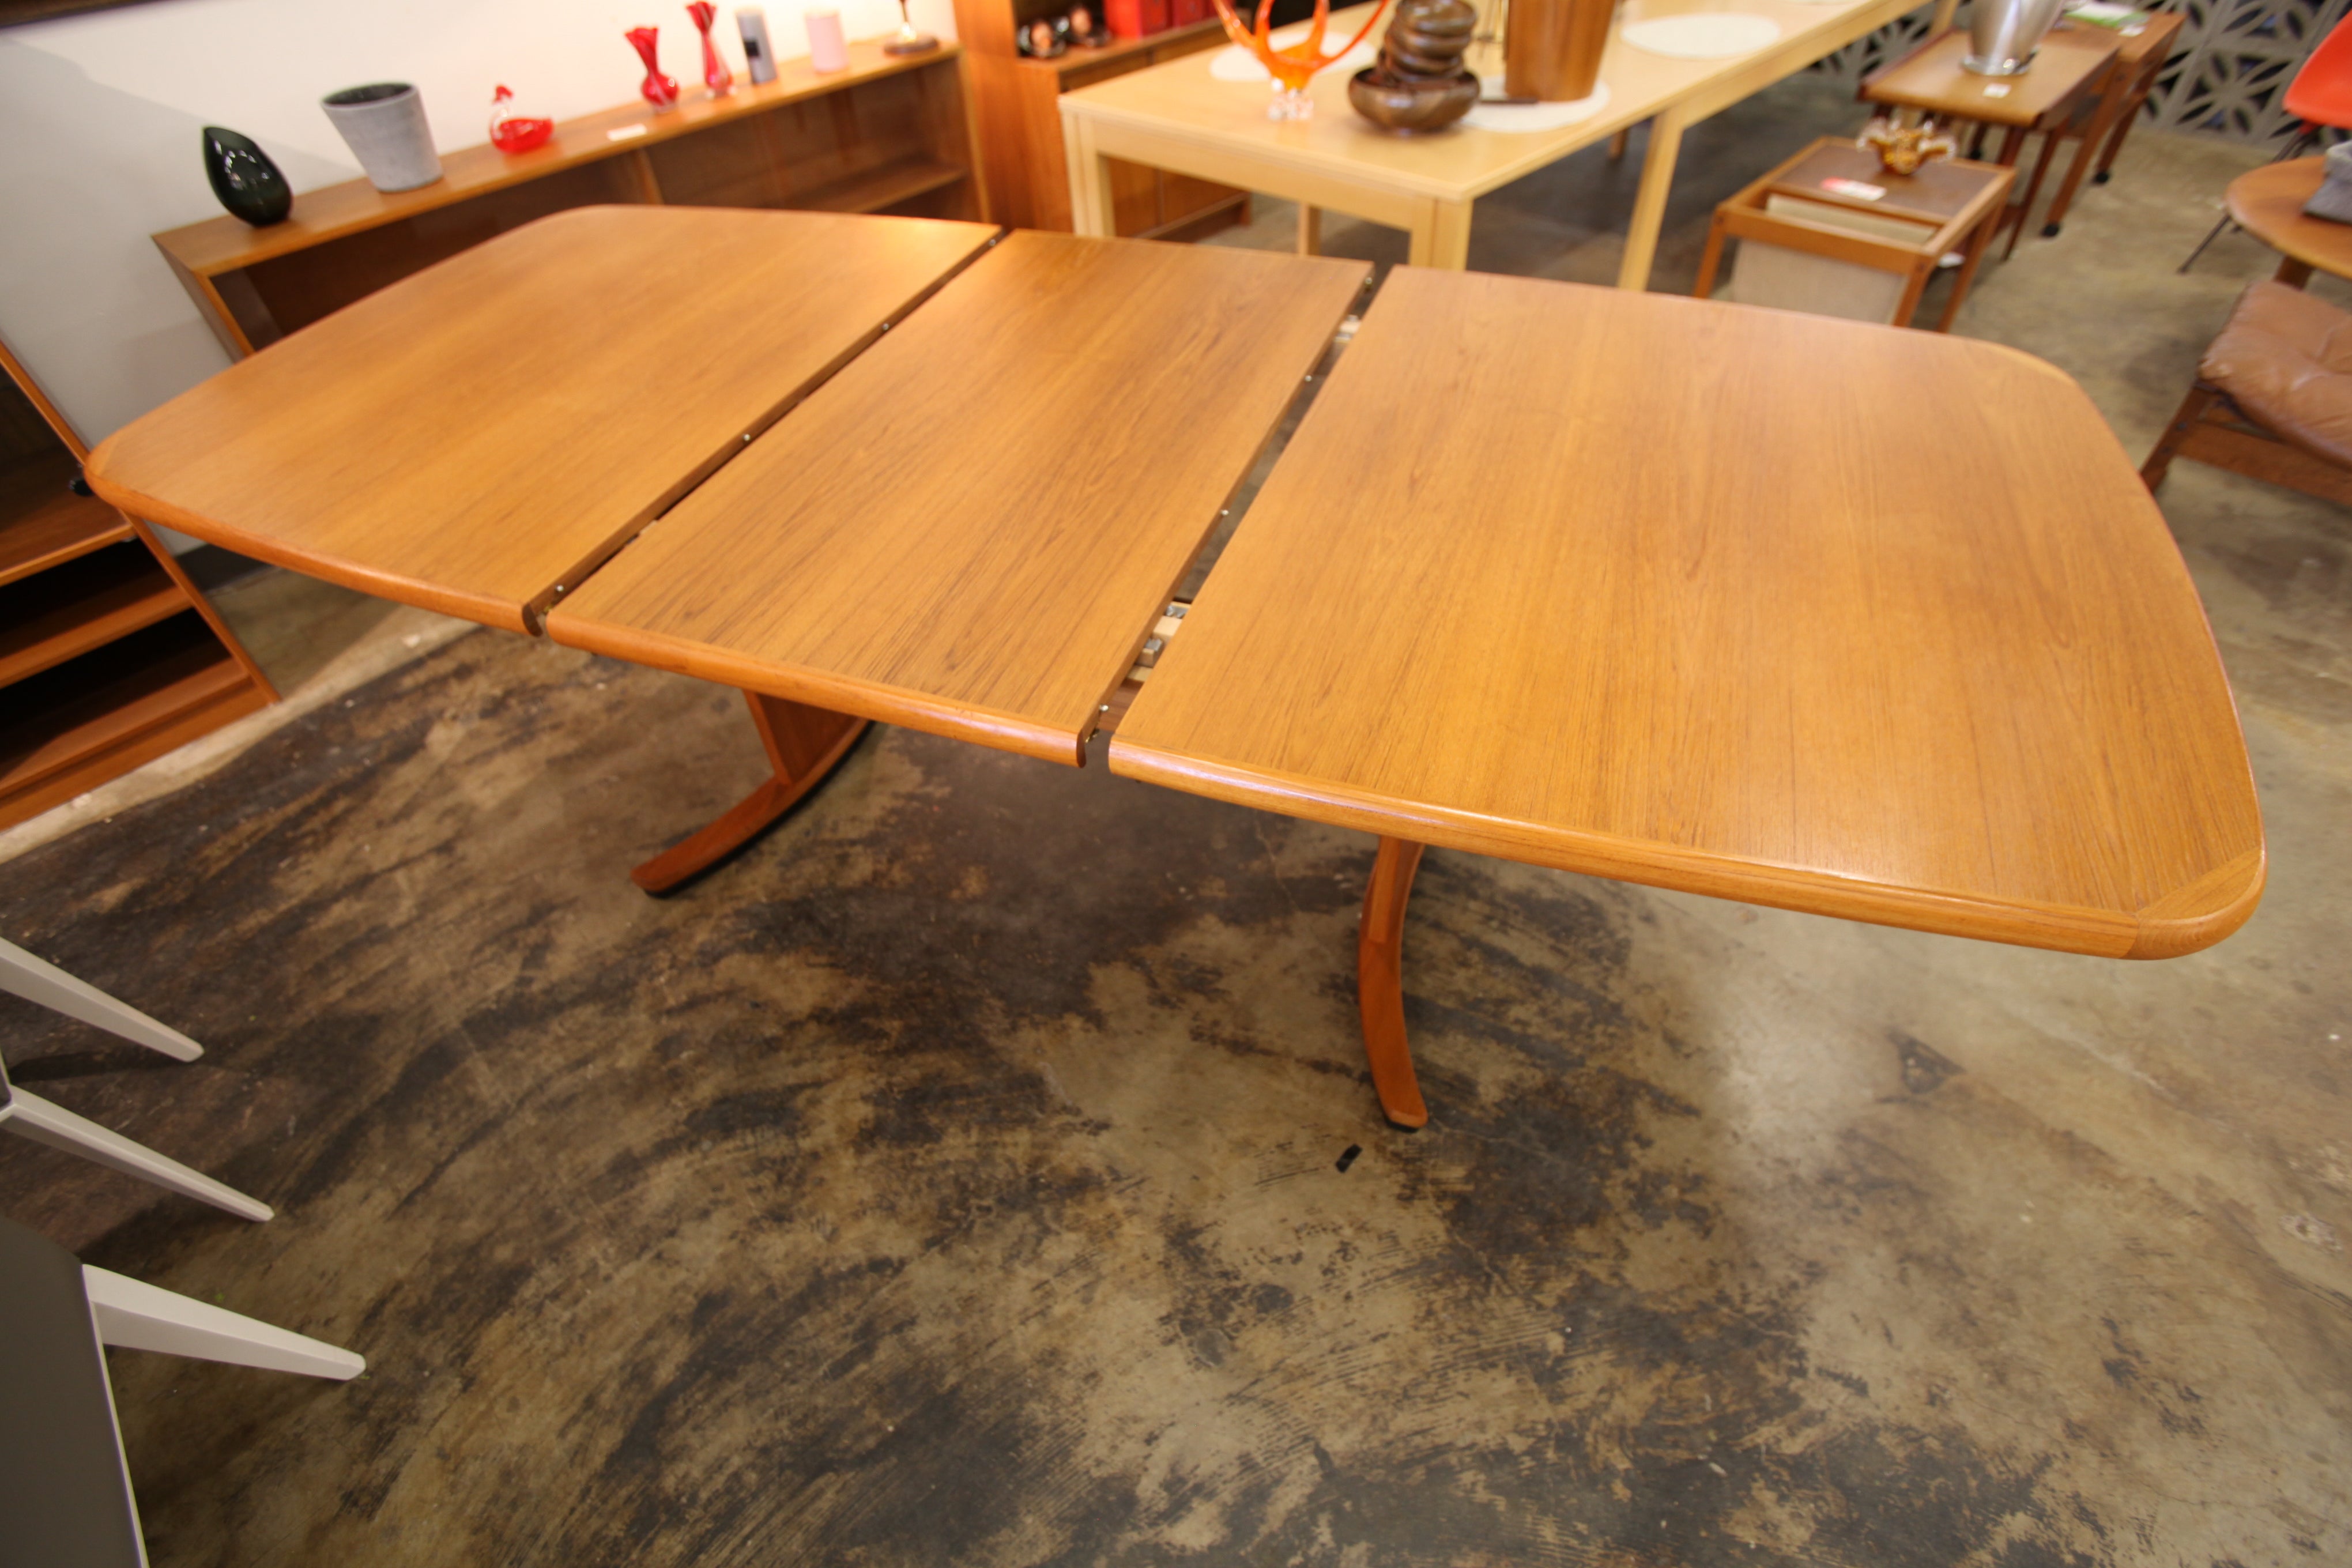 Beautiful Vintage Long Teak Dining Table w/ 2 Leafs in Perfect Original Condition